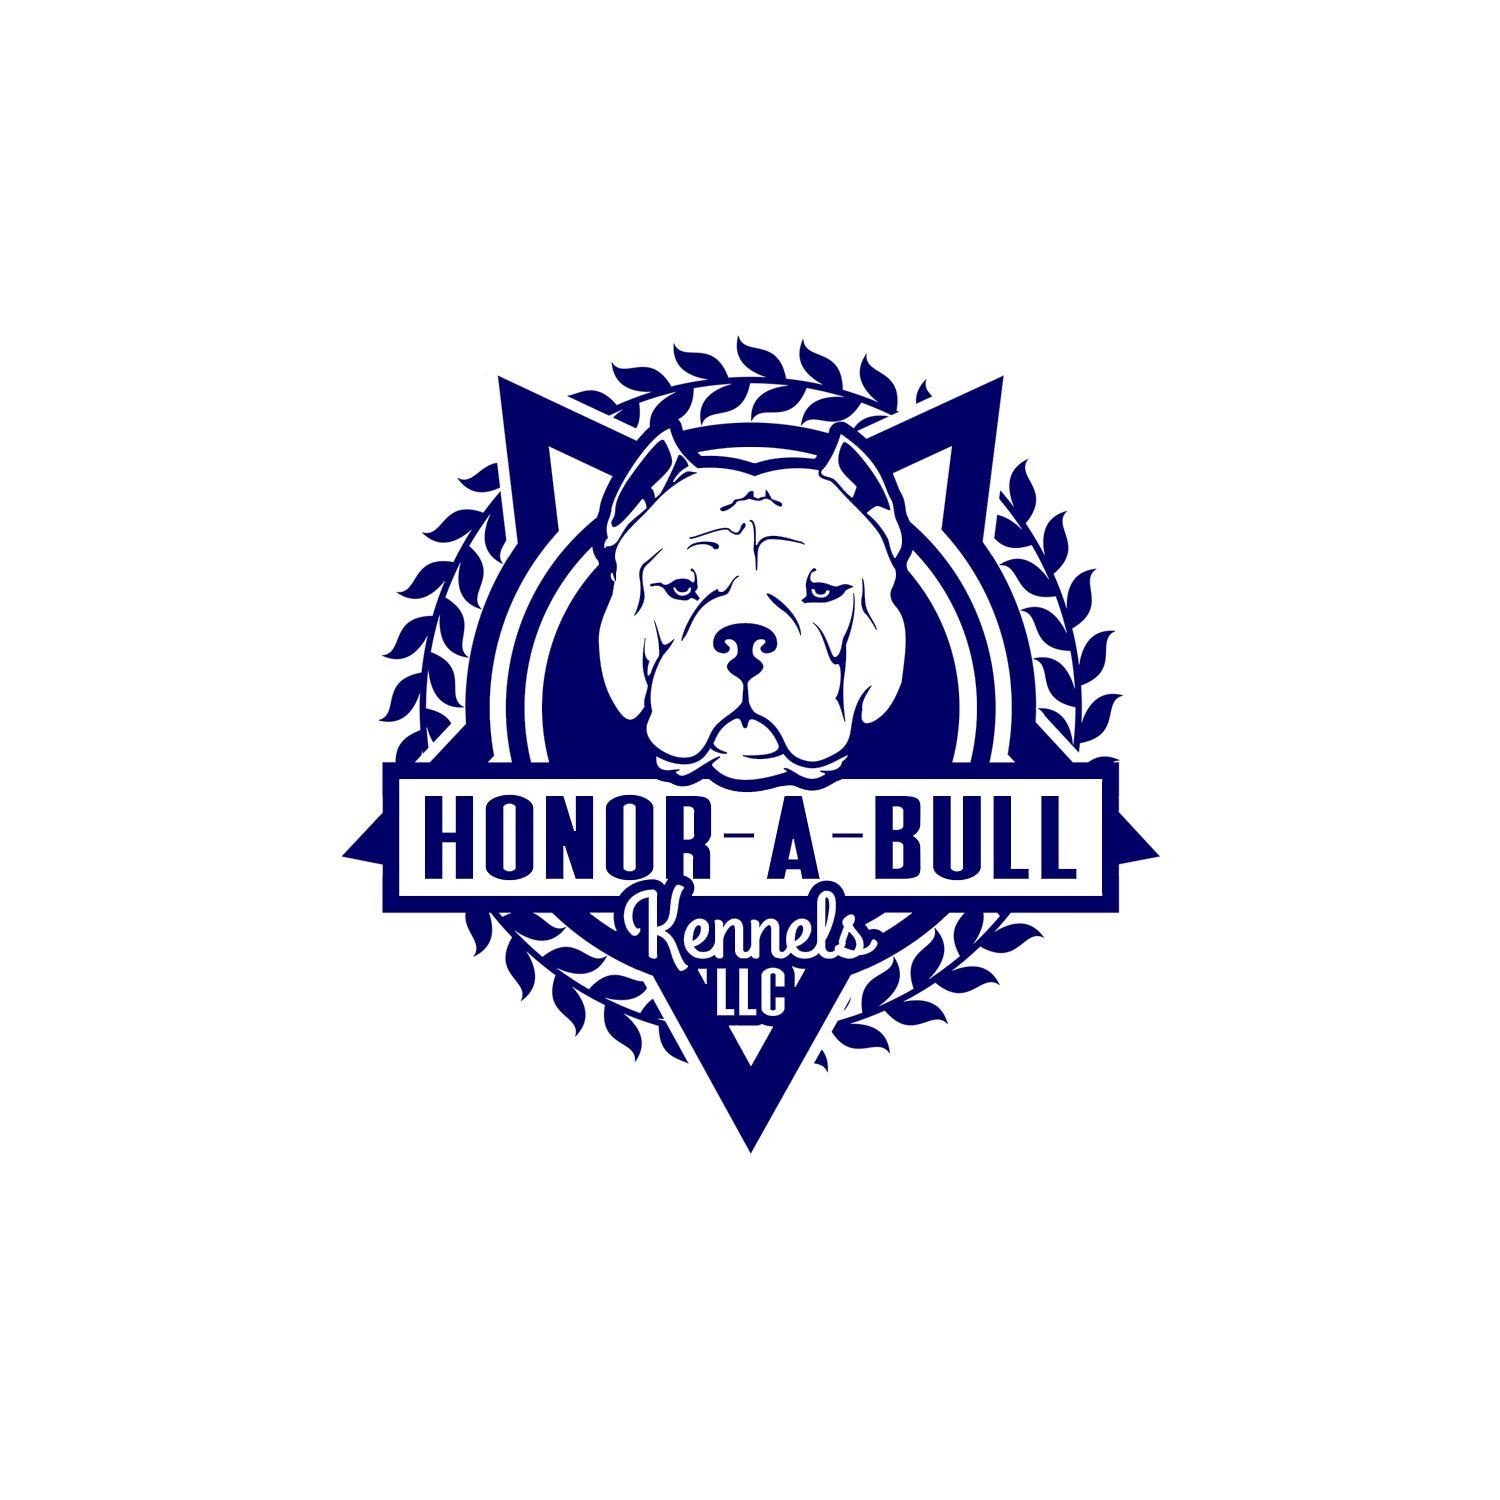 United States Business Logo - Bold, Serious, Business Logo Design For Honor A Bull Kennels LLC